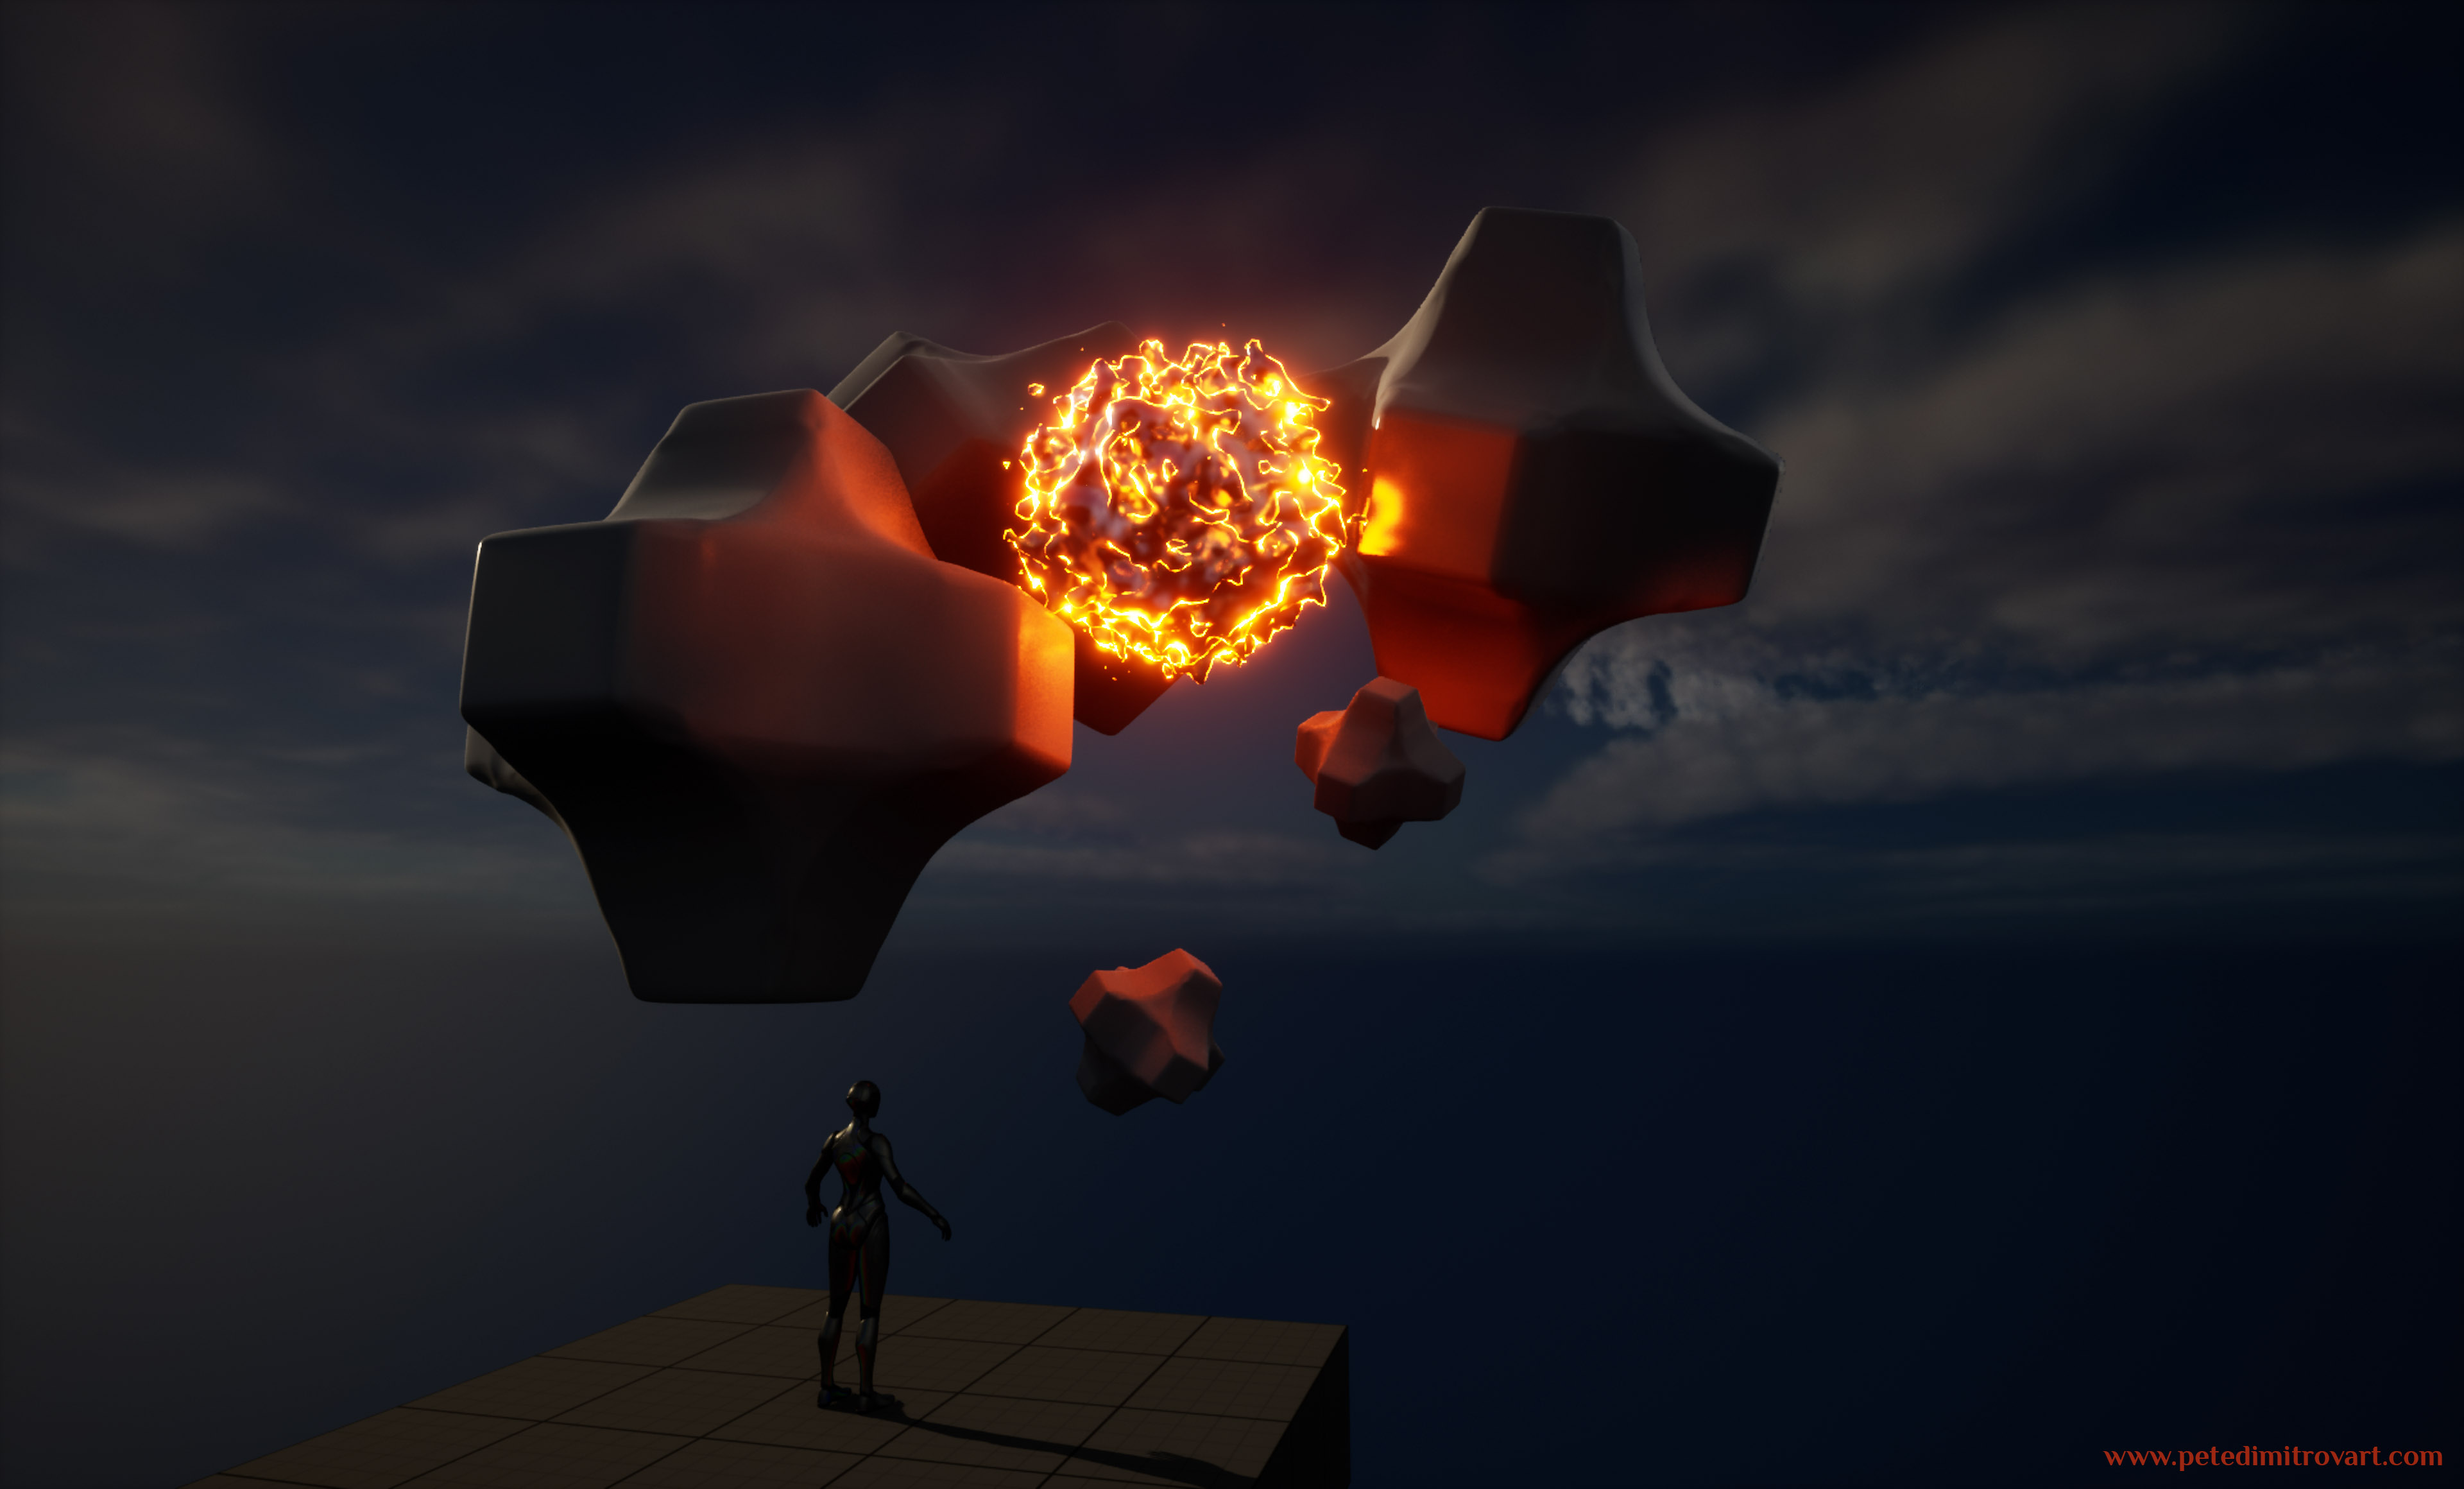 Unreal 5 screenshot. A mannequin in an A pose is facing four floating, large primitives. Between those is a fuzzy orb in a liquid metal appearance. It grows in an overpowering reds, oranges and yellows. It’s emission is picked up in real time through Lumen and casts light on the floating primitives next to it.